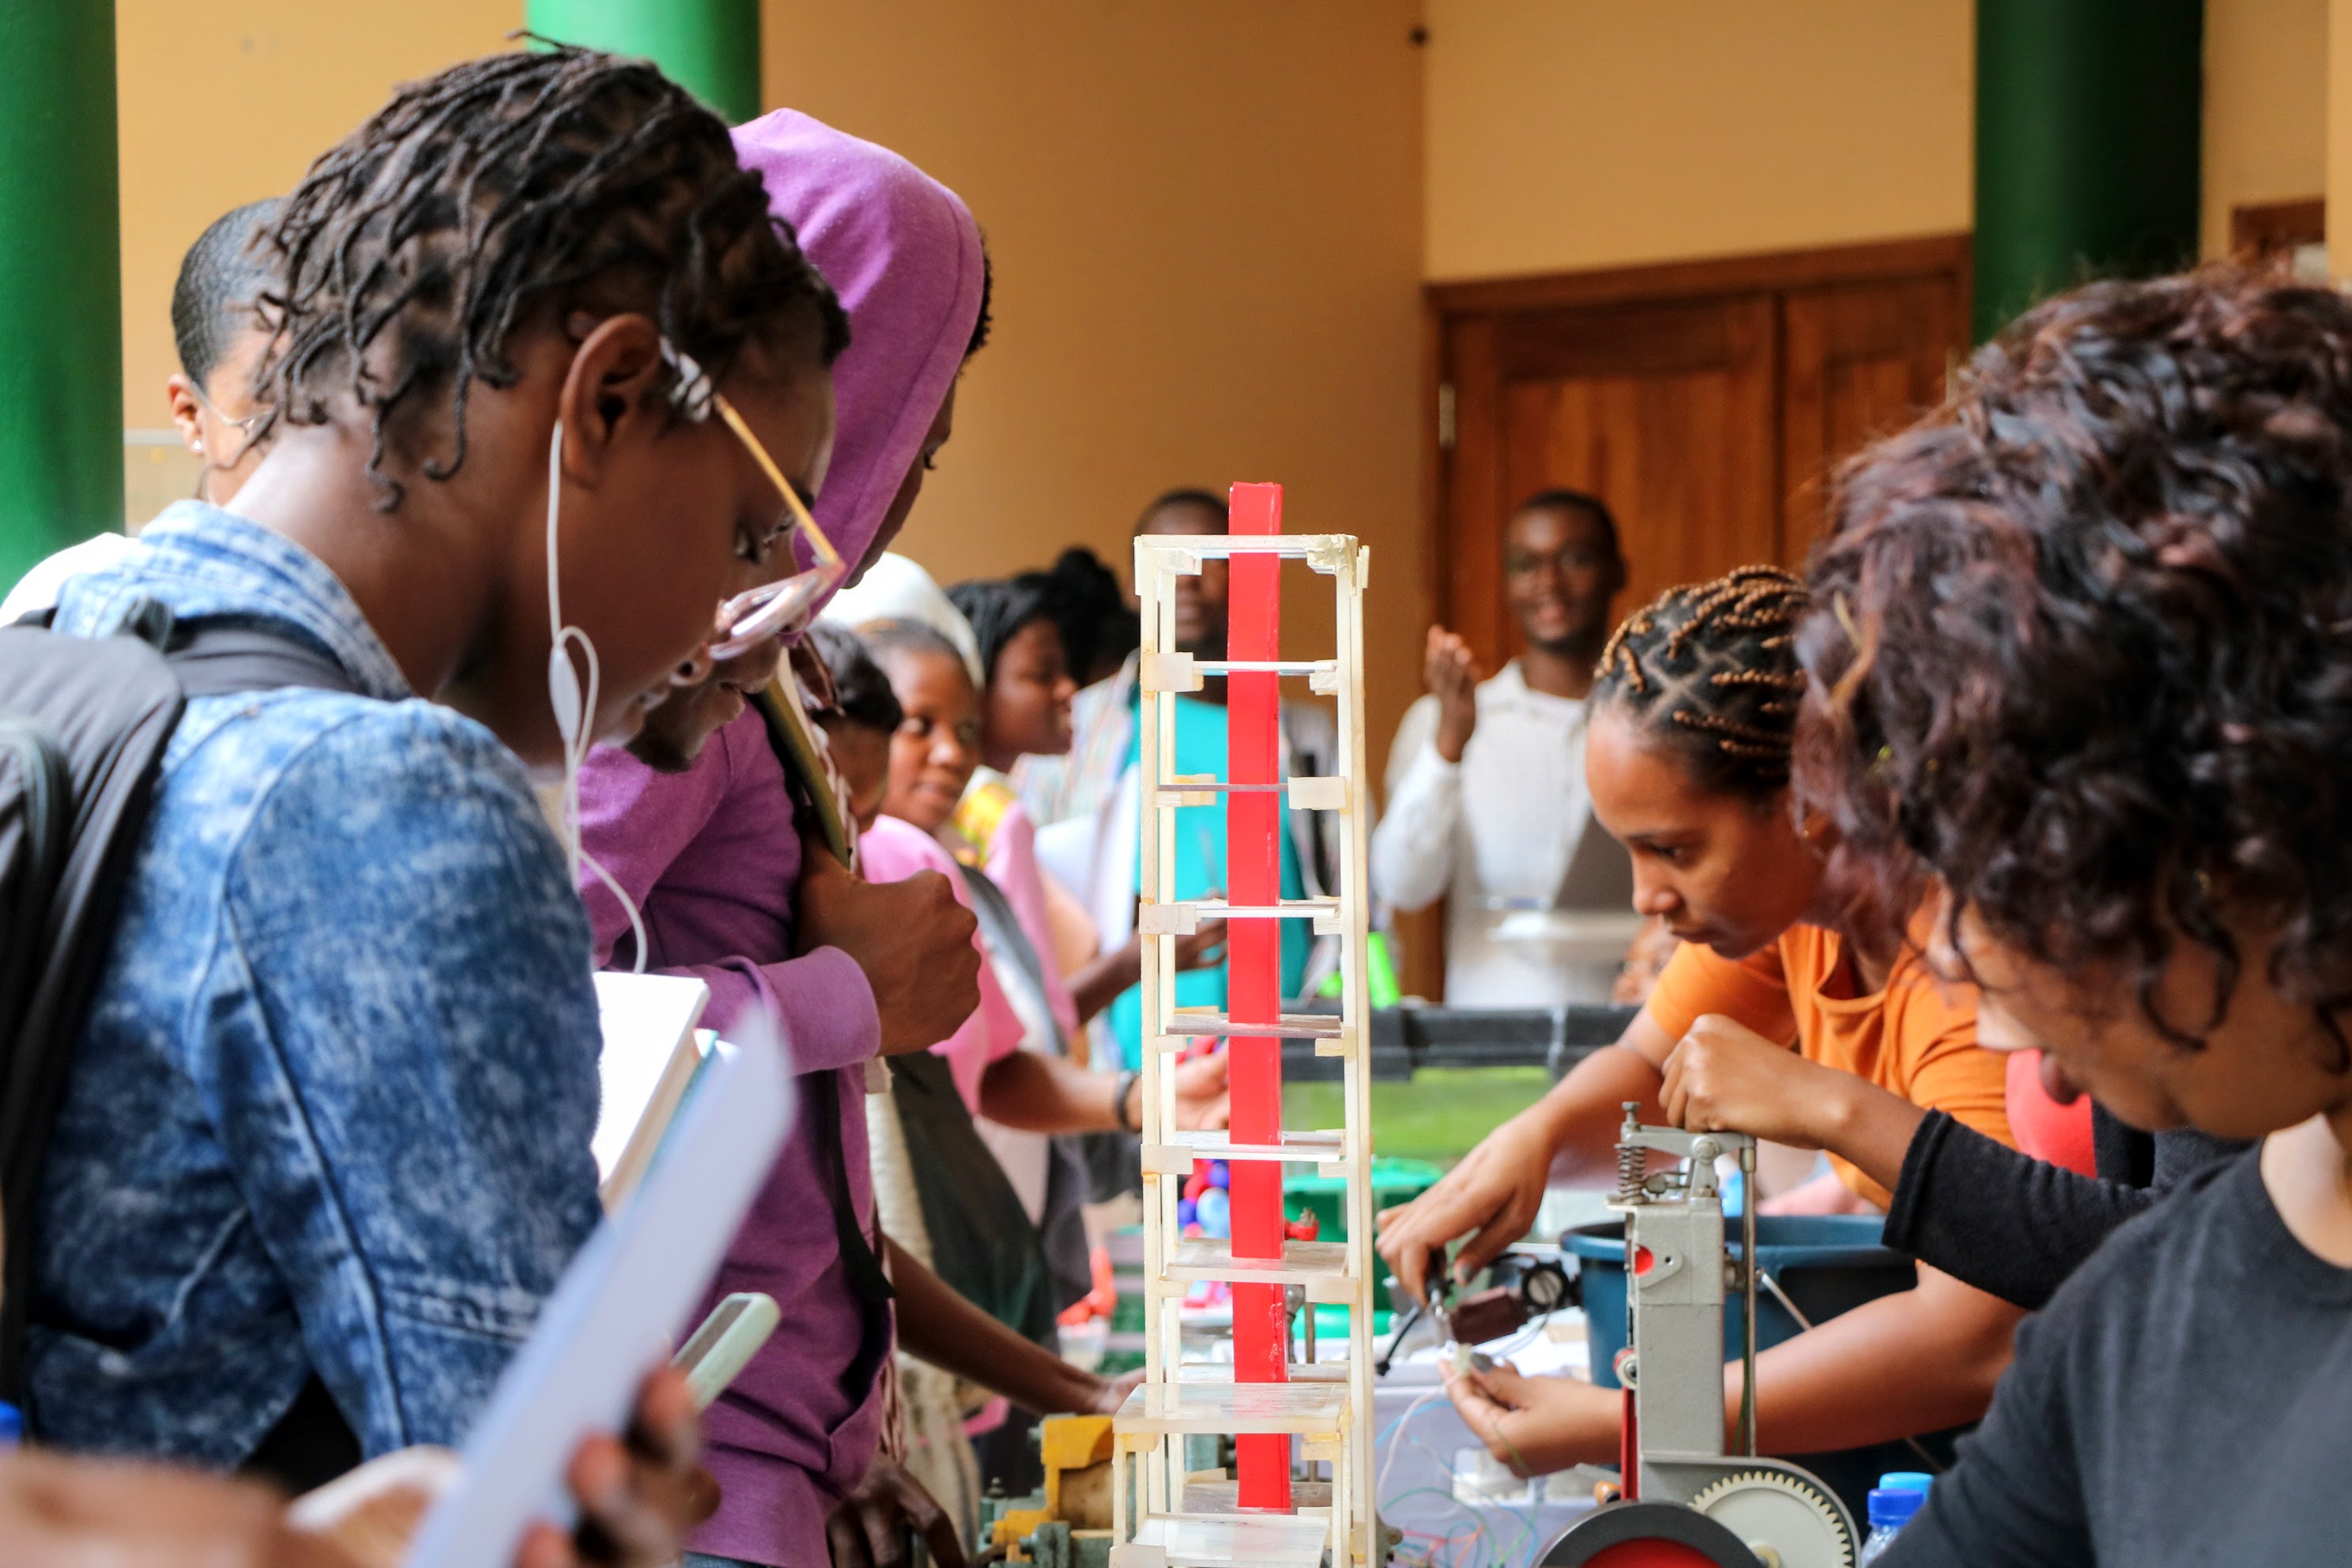 Predicting seismic resilience, at the Share Fair organized by UN Women in partnership with UNESCO and the Belgium Consulate in Maputo to bridge the gender gap in innovation and technology. Photo: UN Women Africa